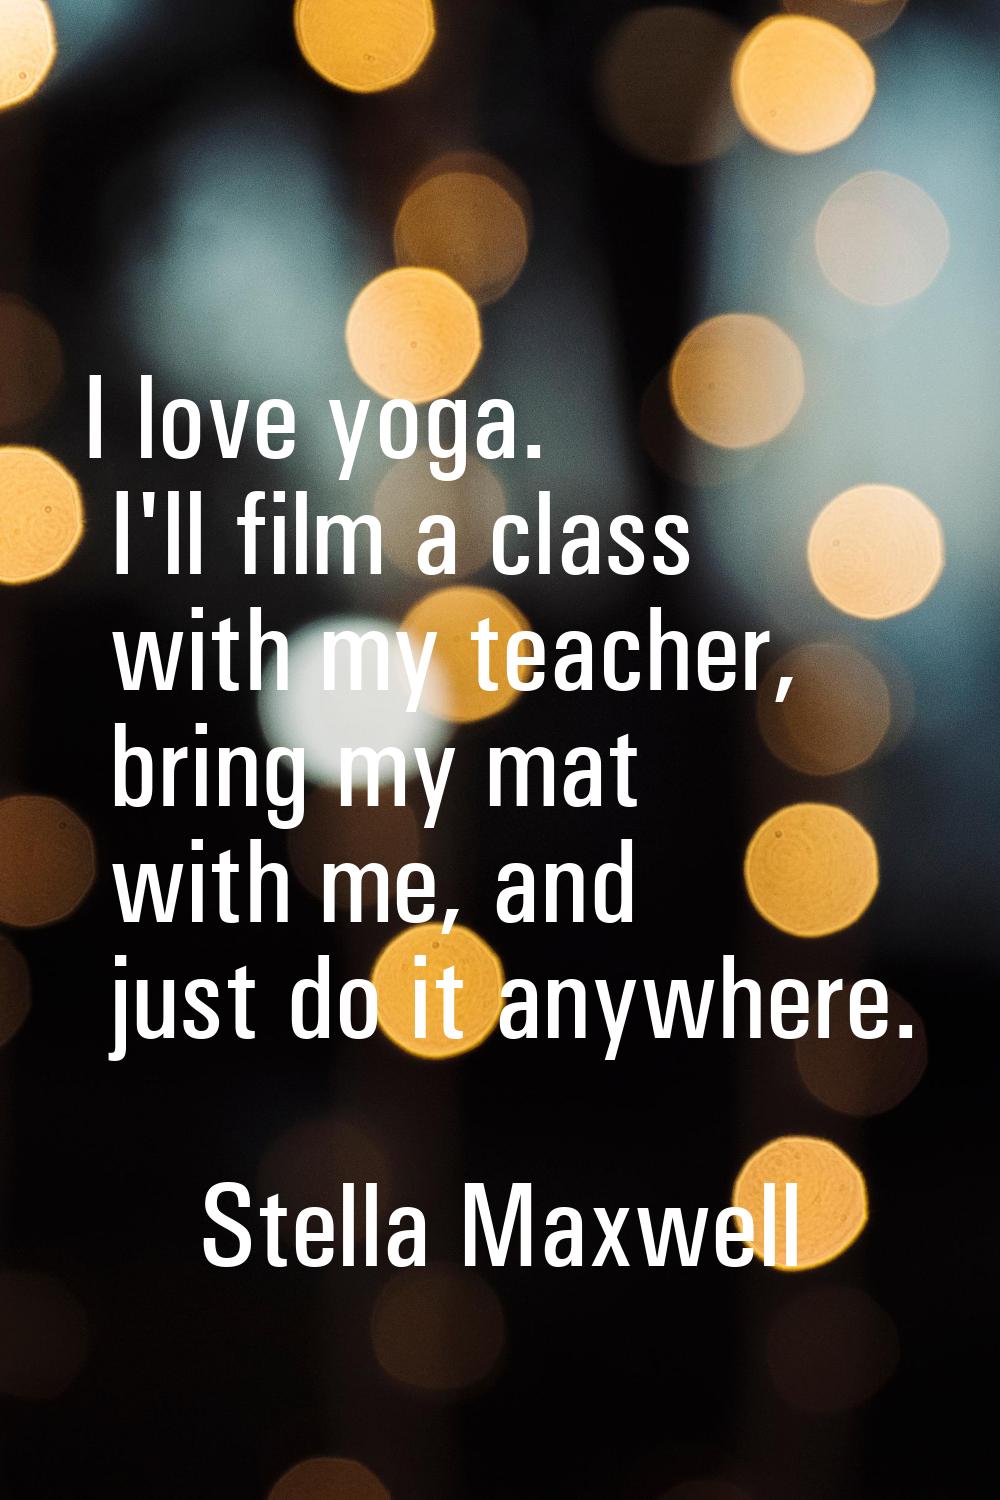 I love yoga. I'll film a class with my teacher, bring my mat with me, and just do it anywhere.